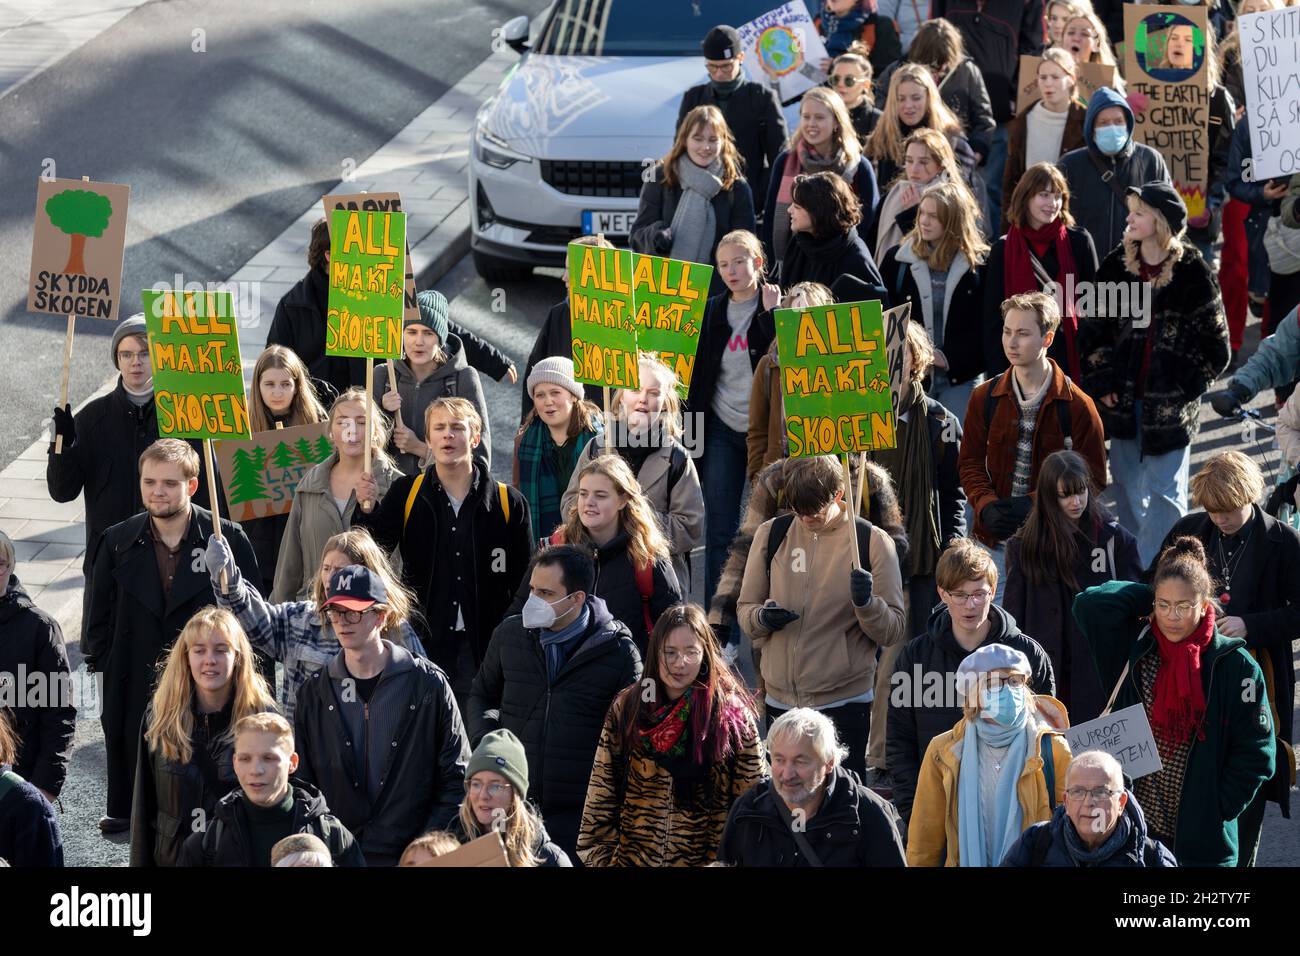 Stockholm, Sweden. 22 October, 2021. Swedish climate activists inspired by Greta Thunberg protest in Stockholm Stock Photo